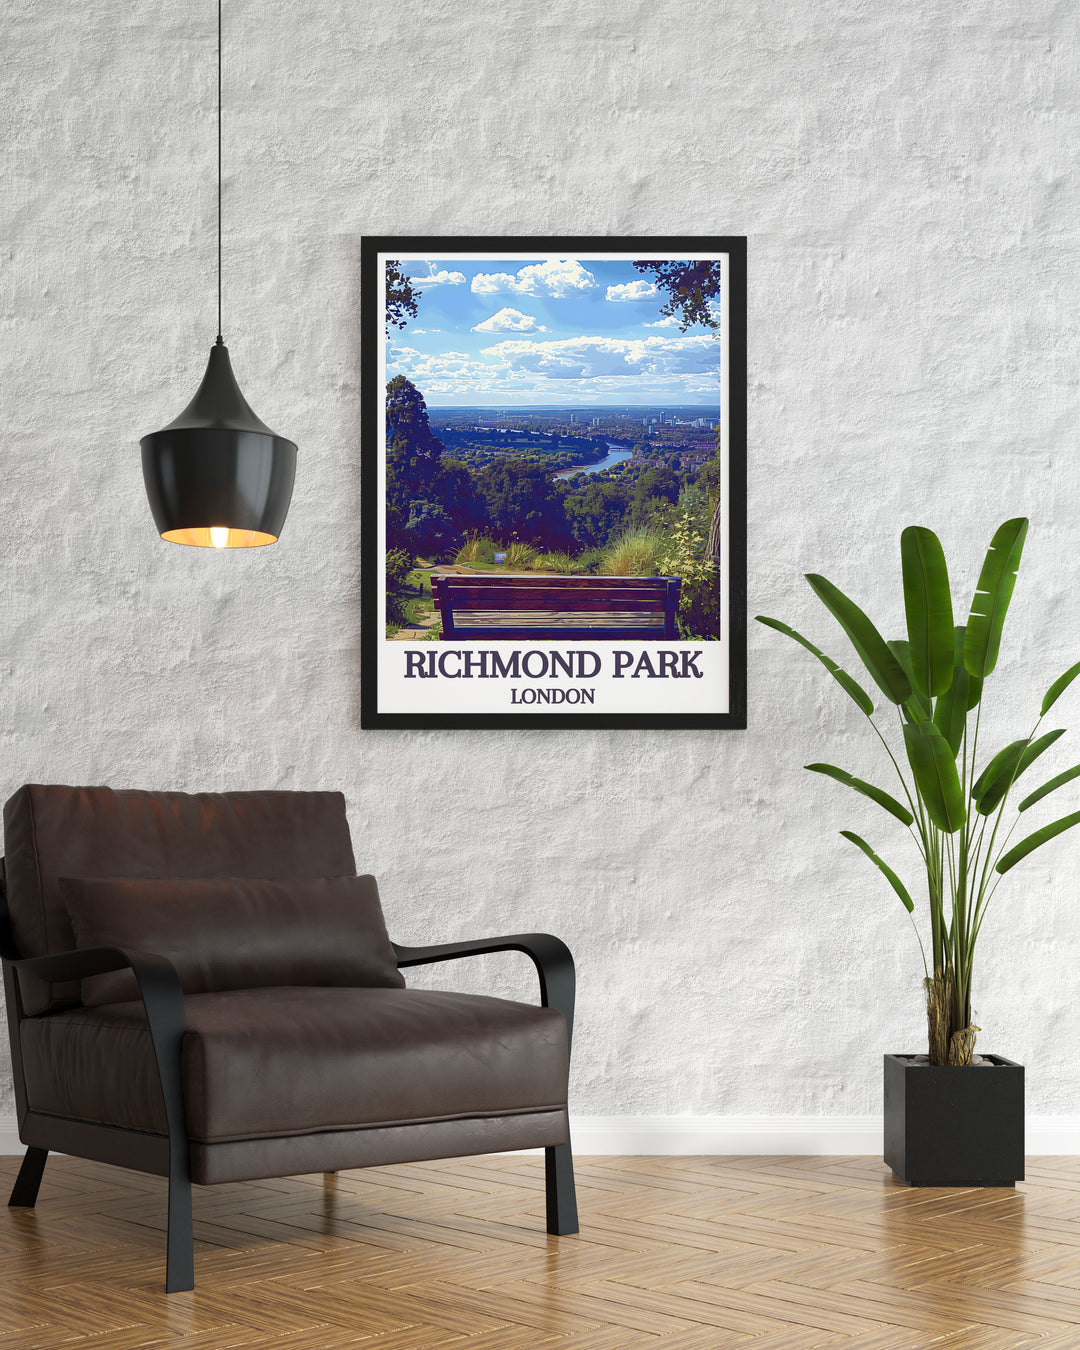 Stunning Gallery Wall Art of King Henrys Mound, showcasing the breathtaking view from Richmond Park to St. Pauls Cathedral, perfect for any decor.